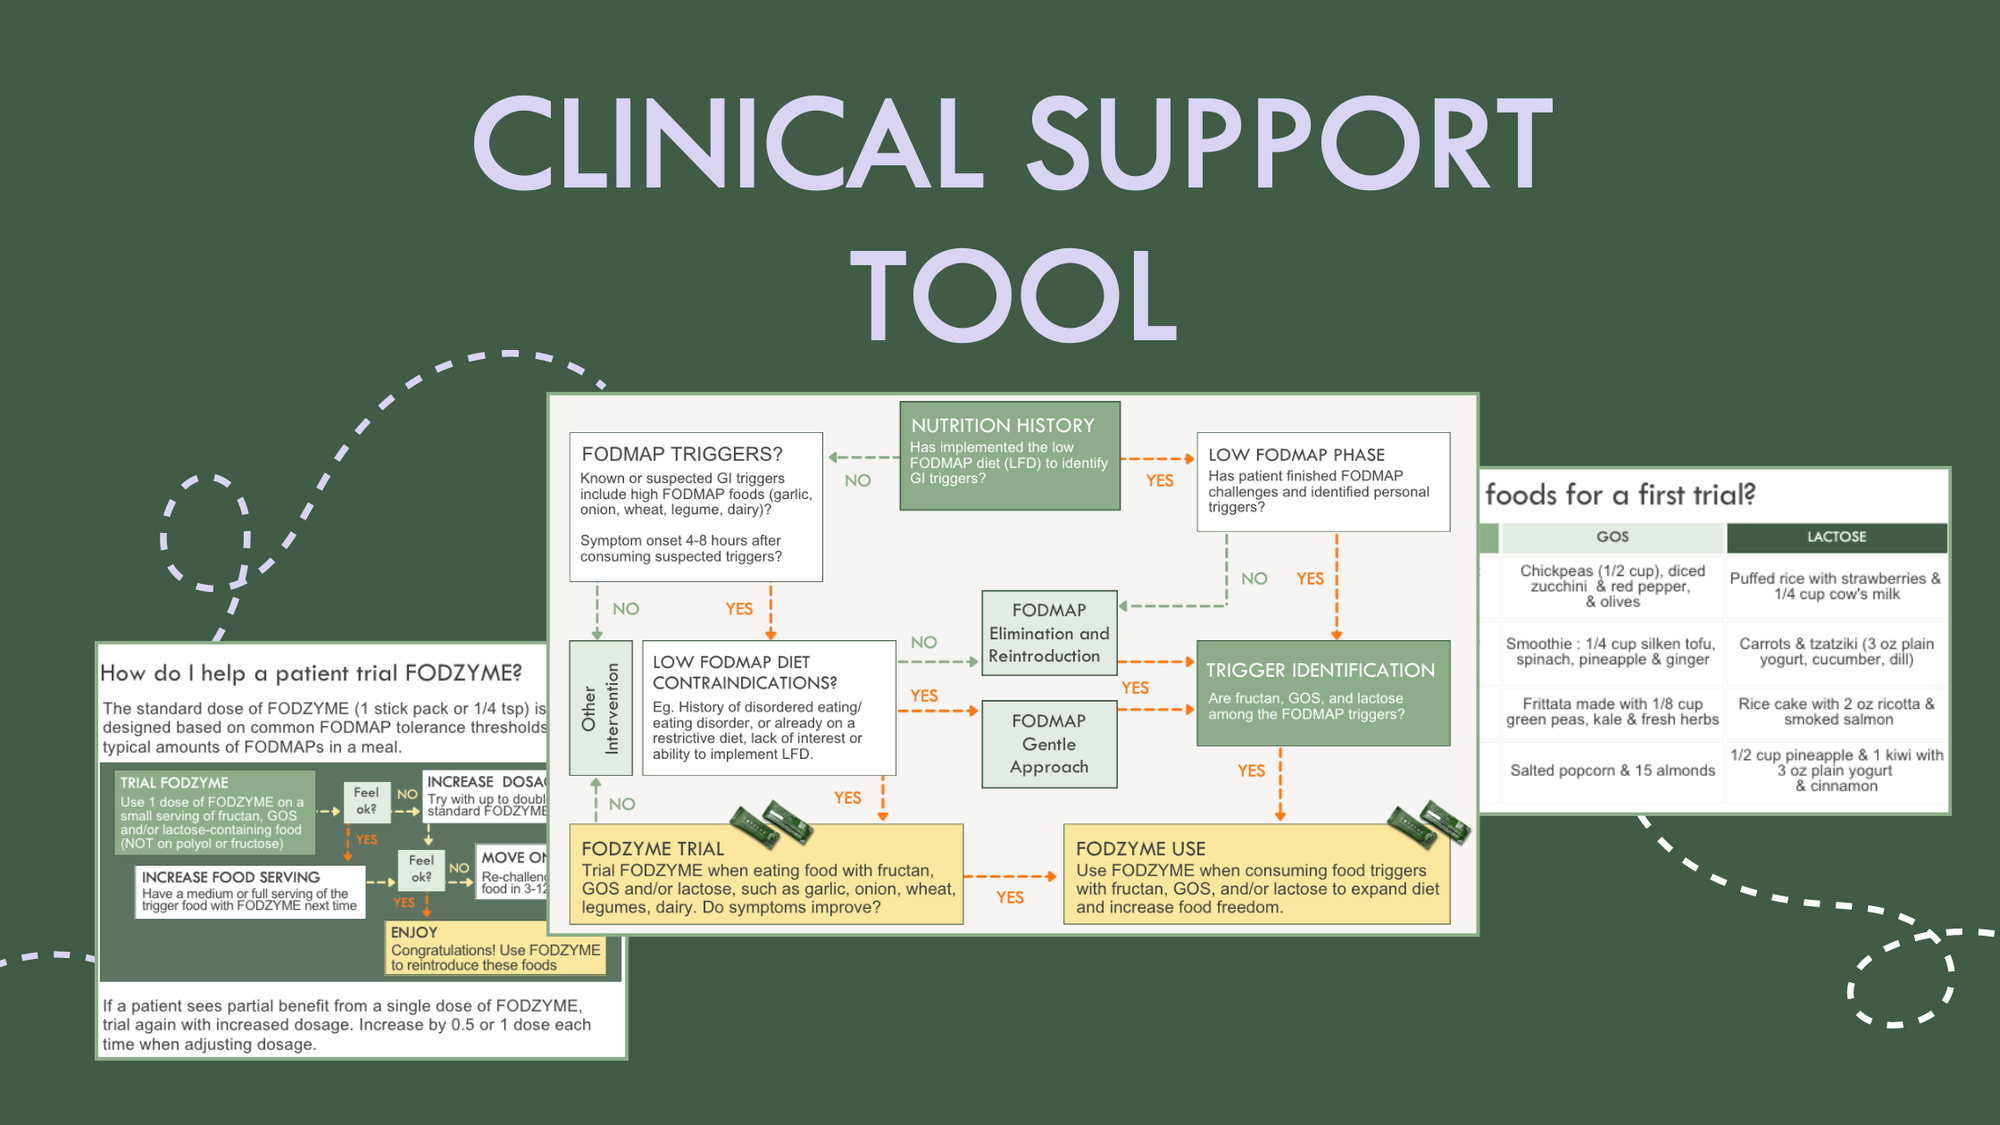 How to Use: FODZYME Clinical Support Tool